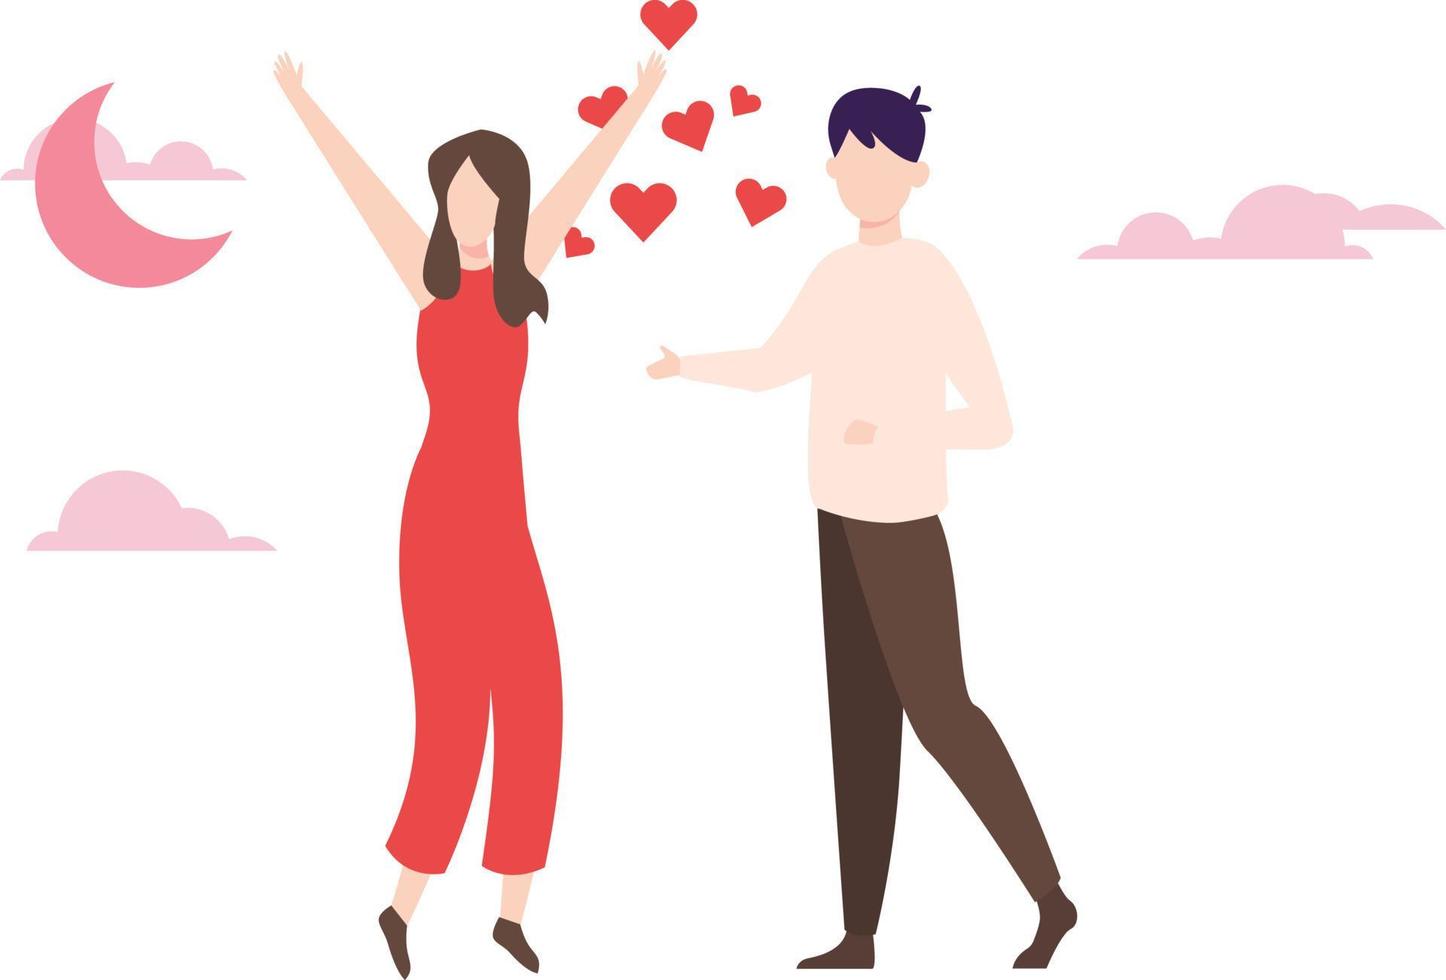 There is a boy and a girl enjoying valentine. vector